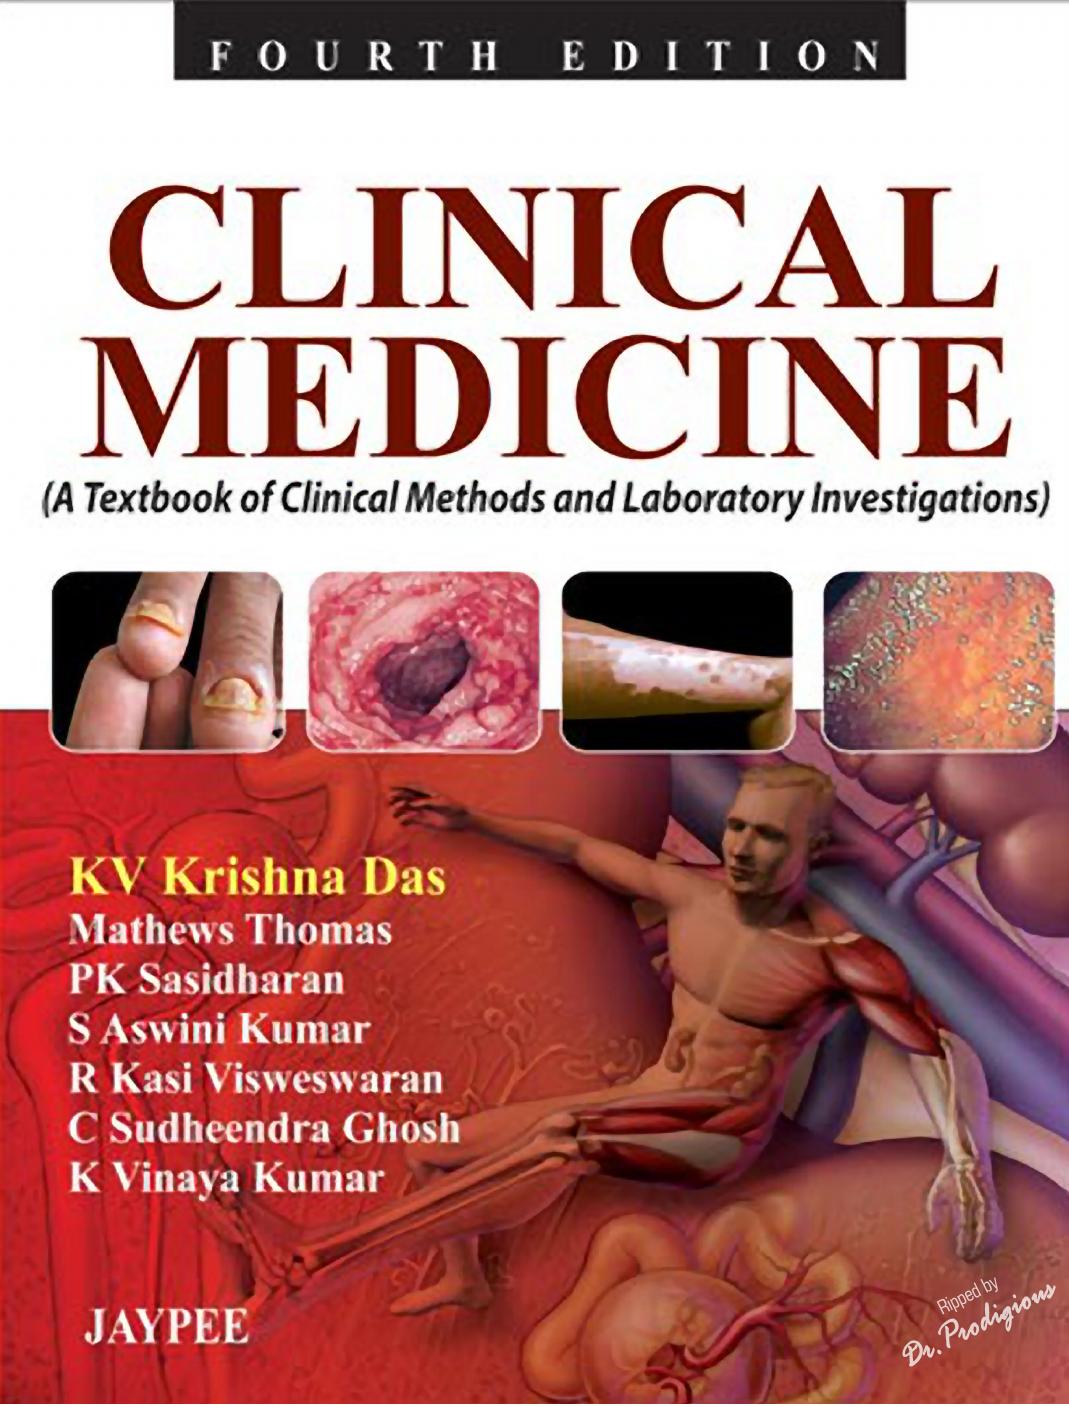 Clinical Medicine: A Textbook of Clinical Methods and Laboratory Investigations, 4th Edition